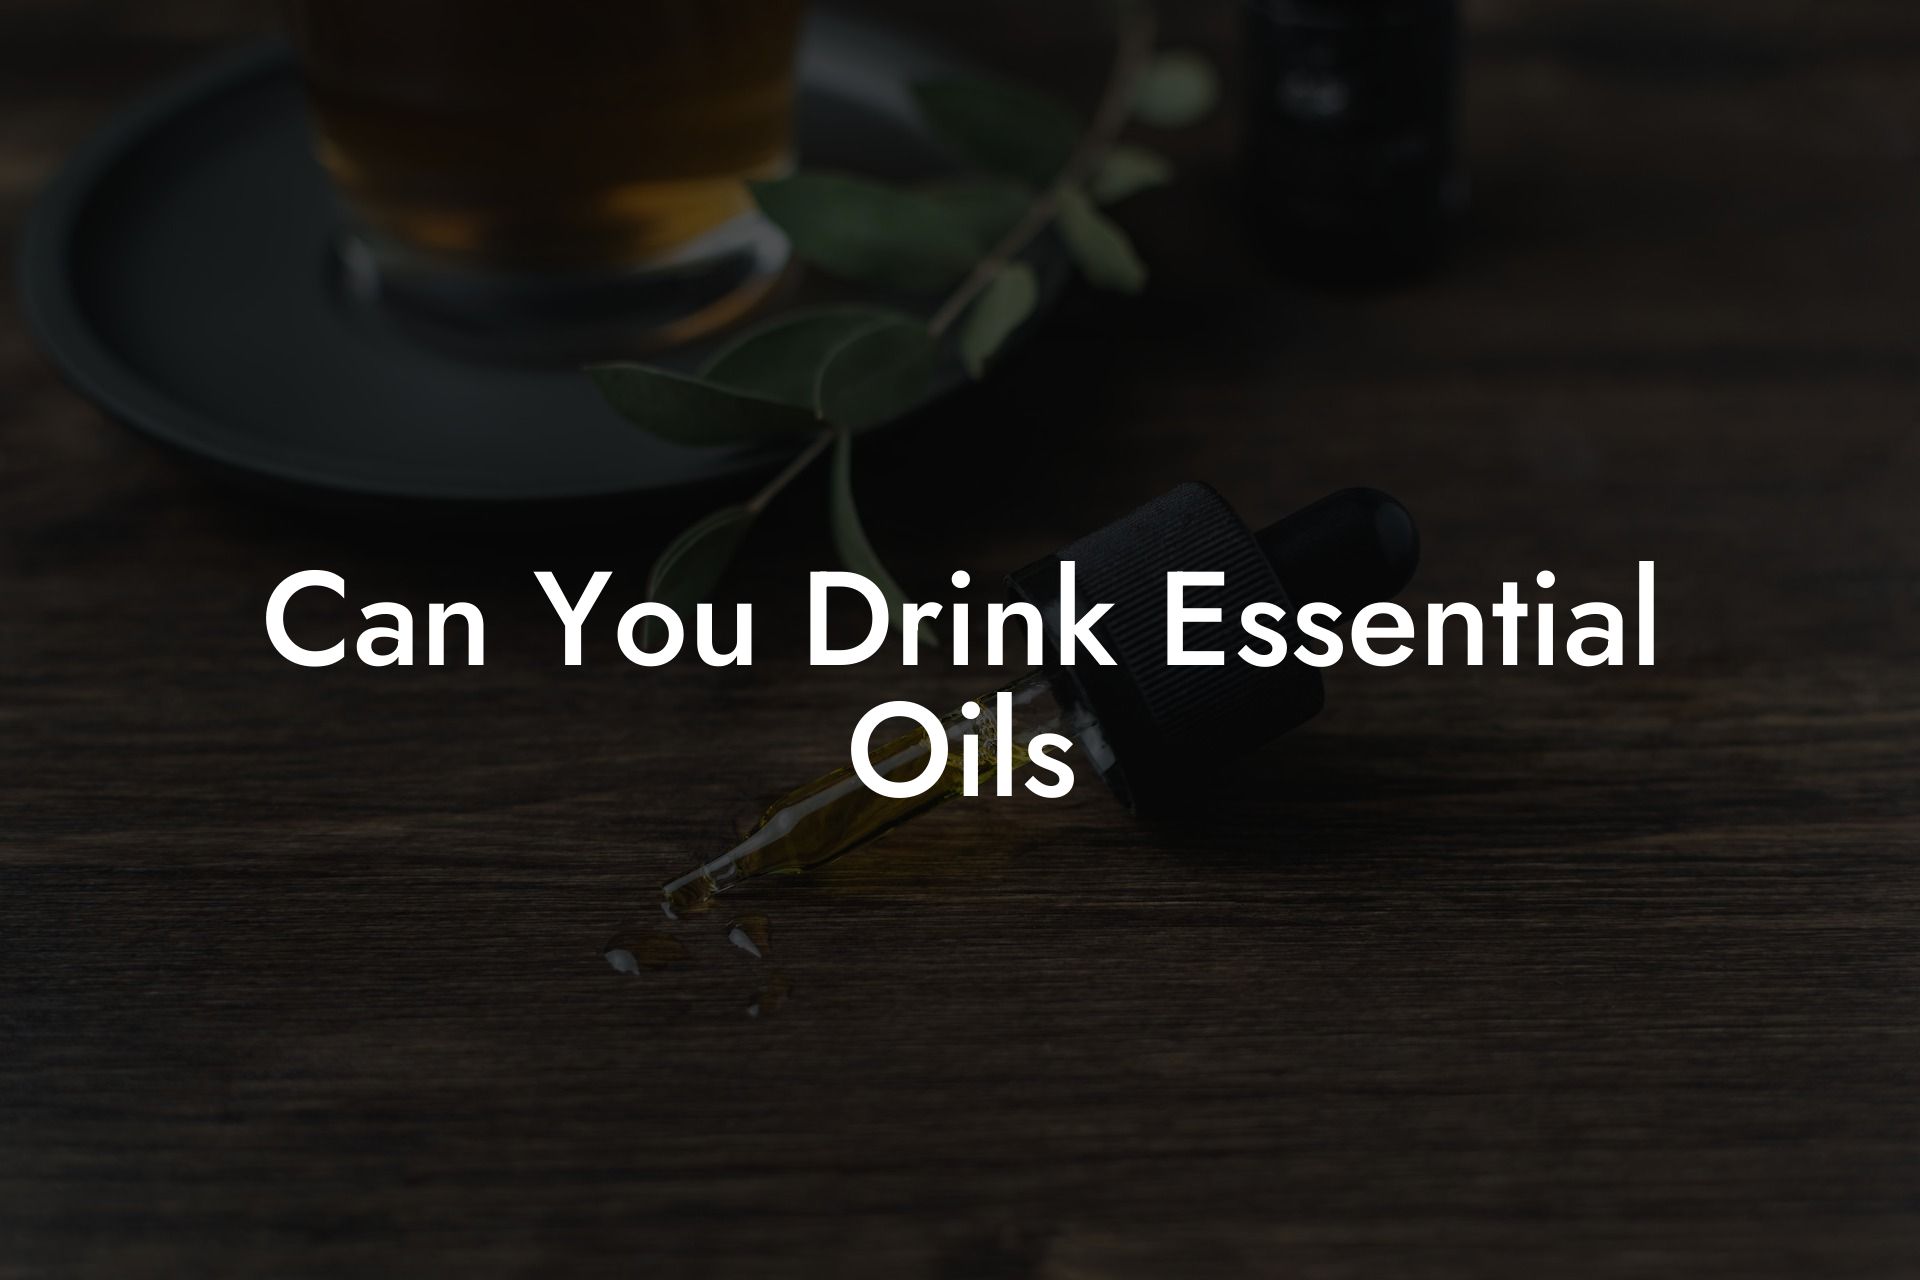 Can You Drink Essential Oils